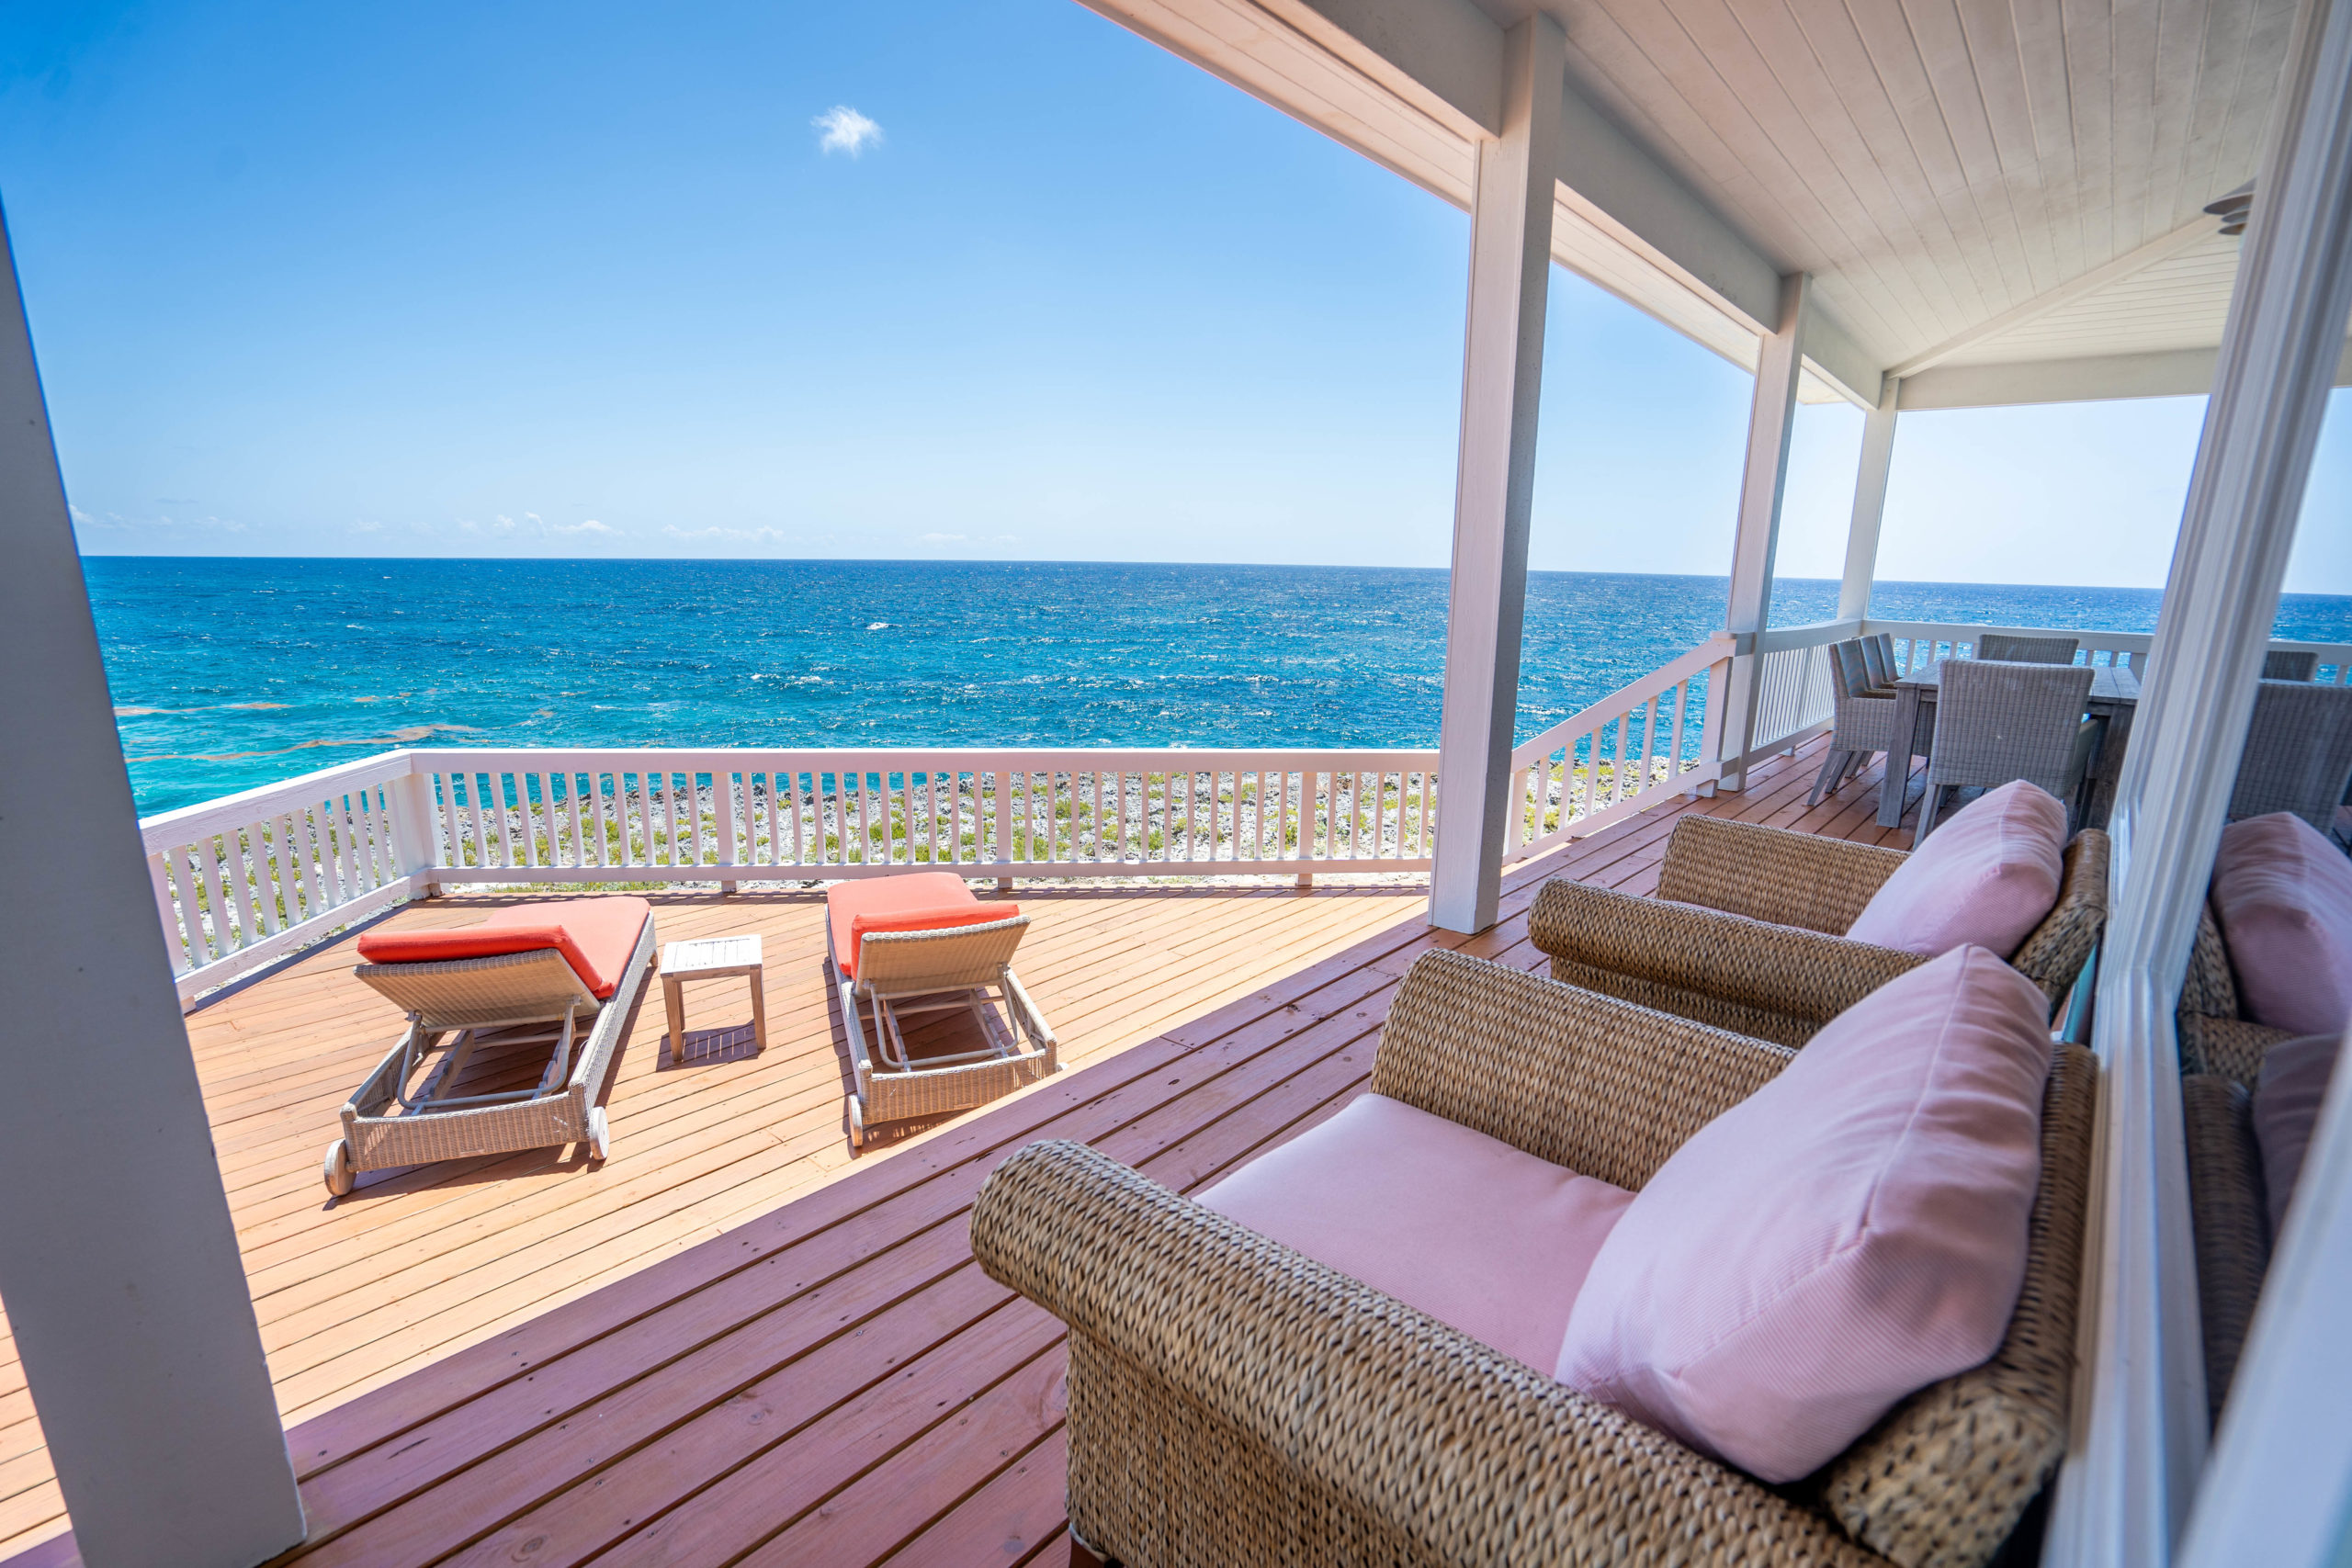 Deck view from a beachfront house on Winding Bay Bahamas